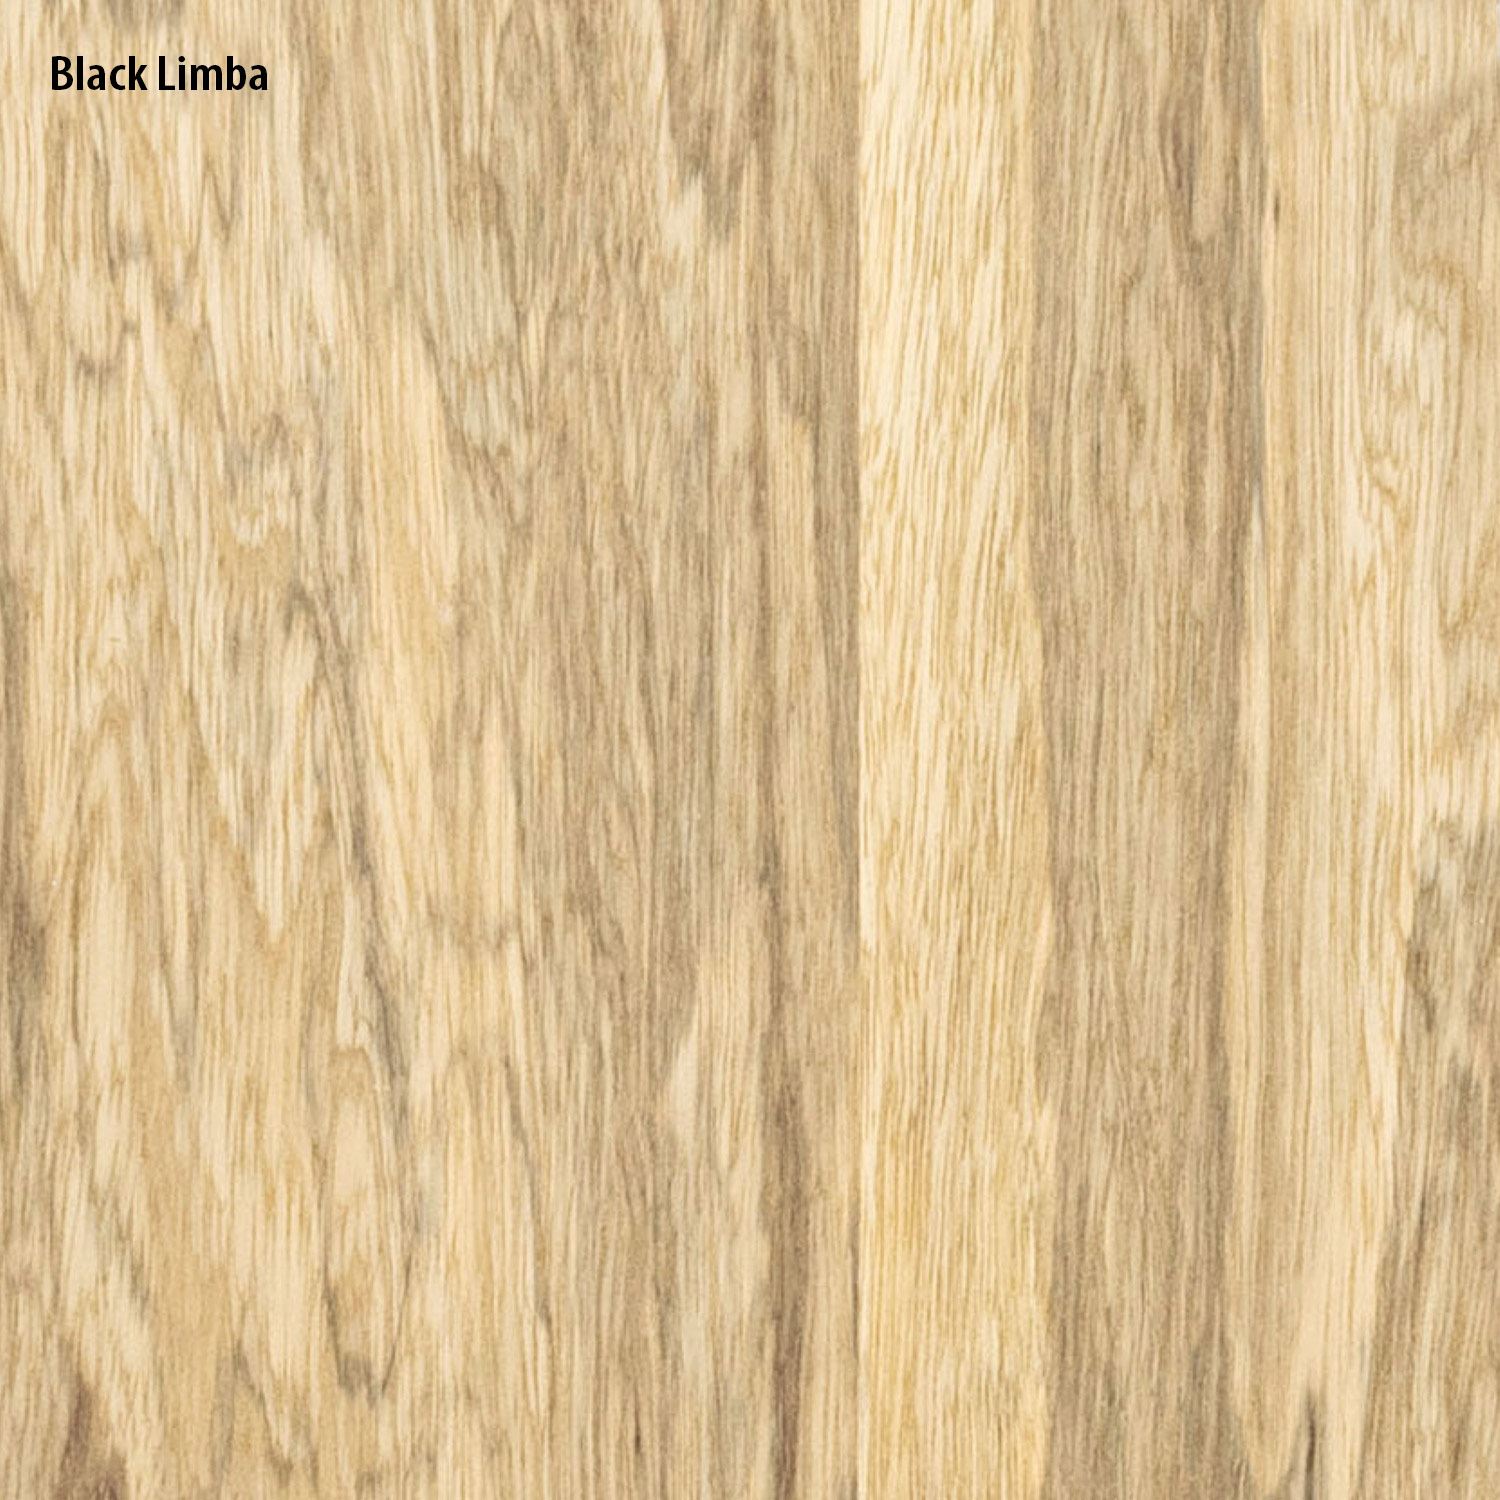 Sawmill Specials – Body Blanks, AAA Black Limba, Sanded, 2-Piece